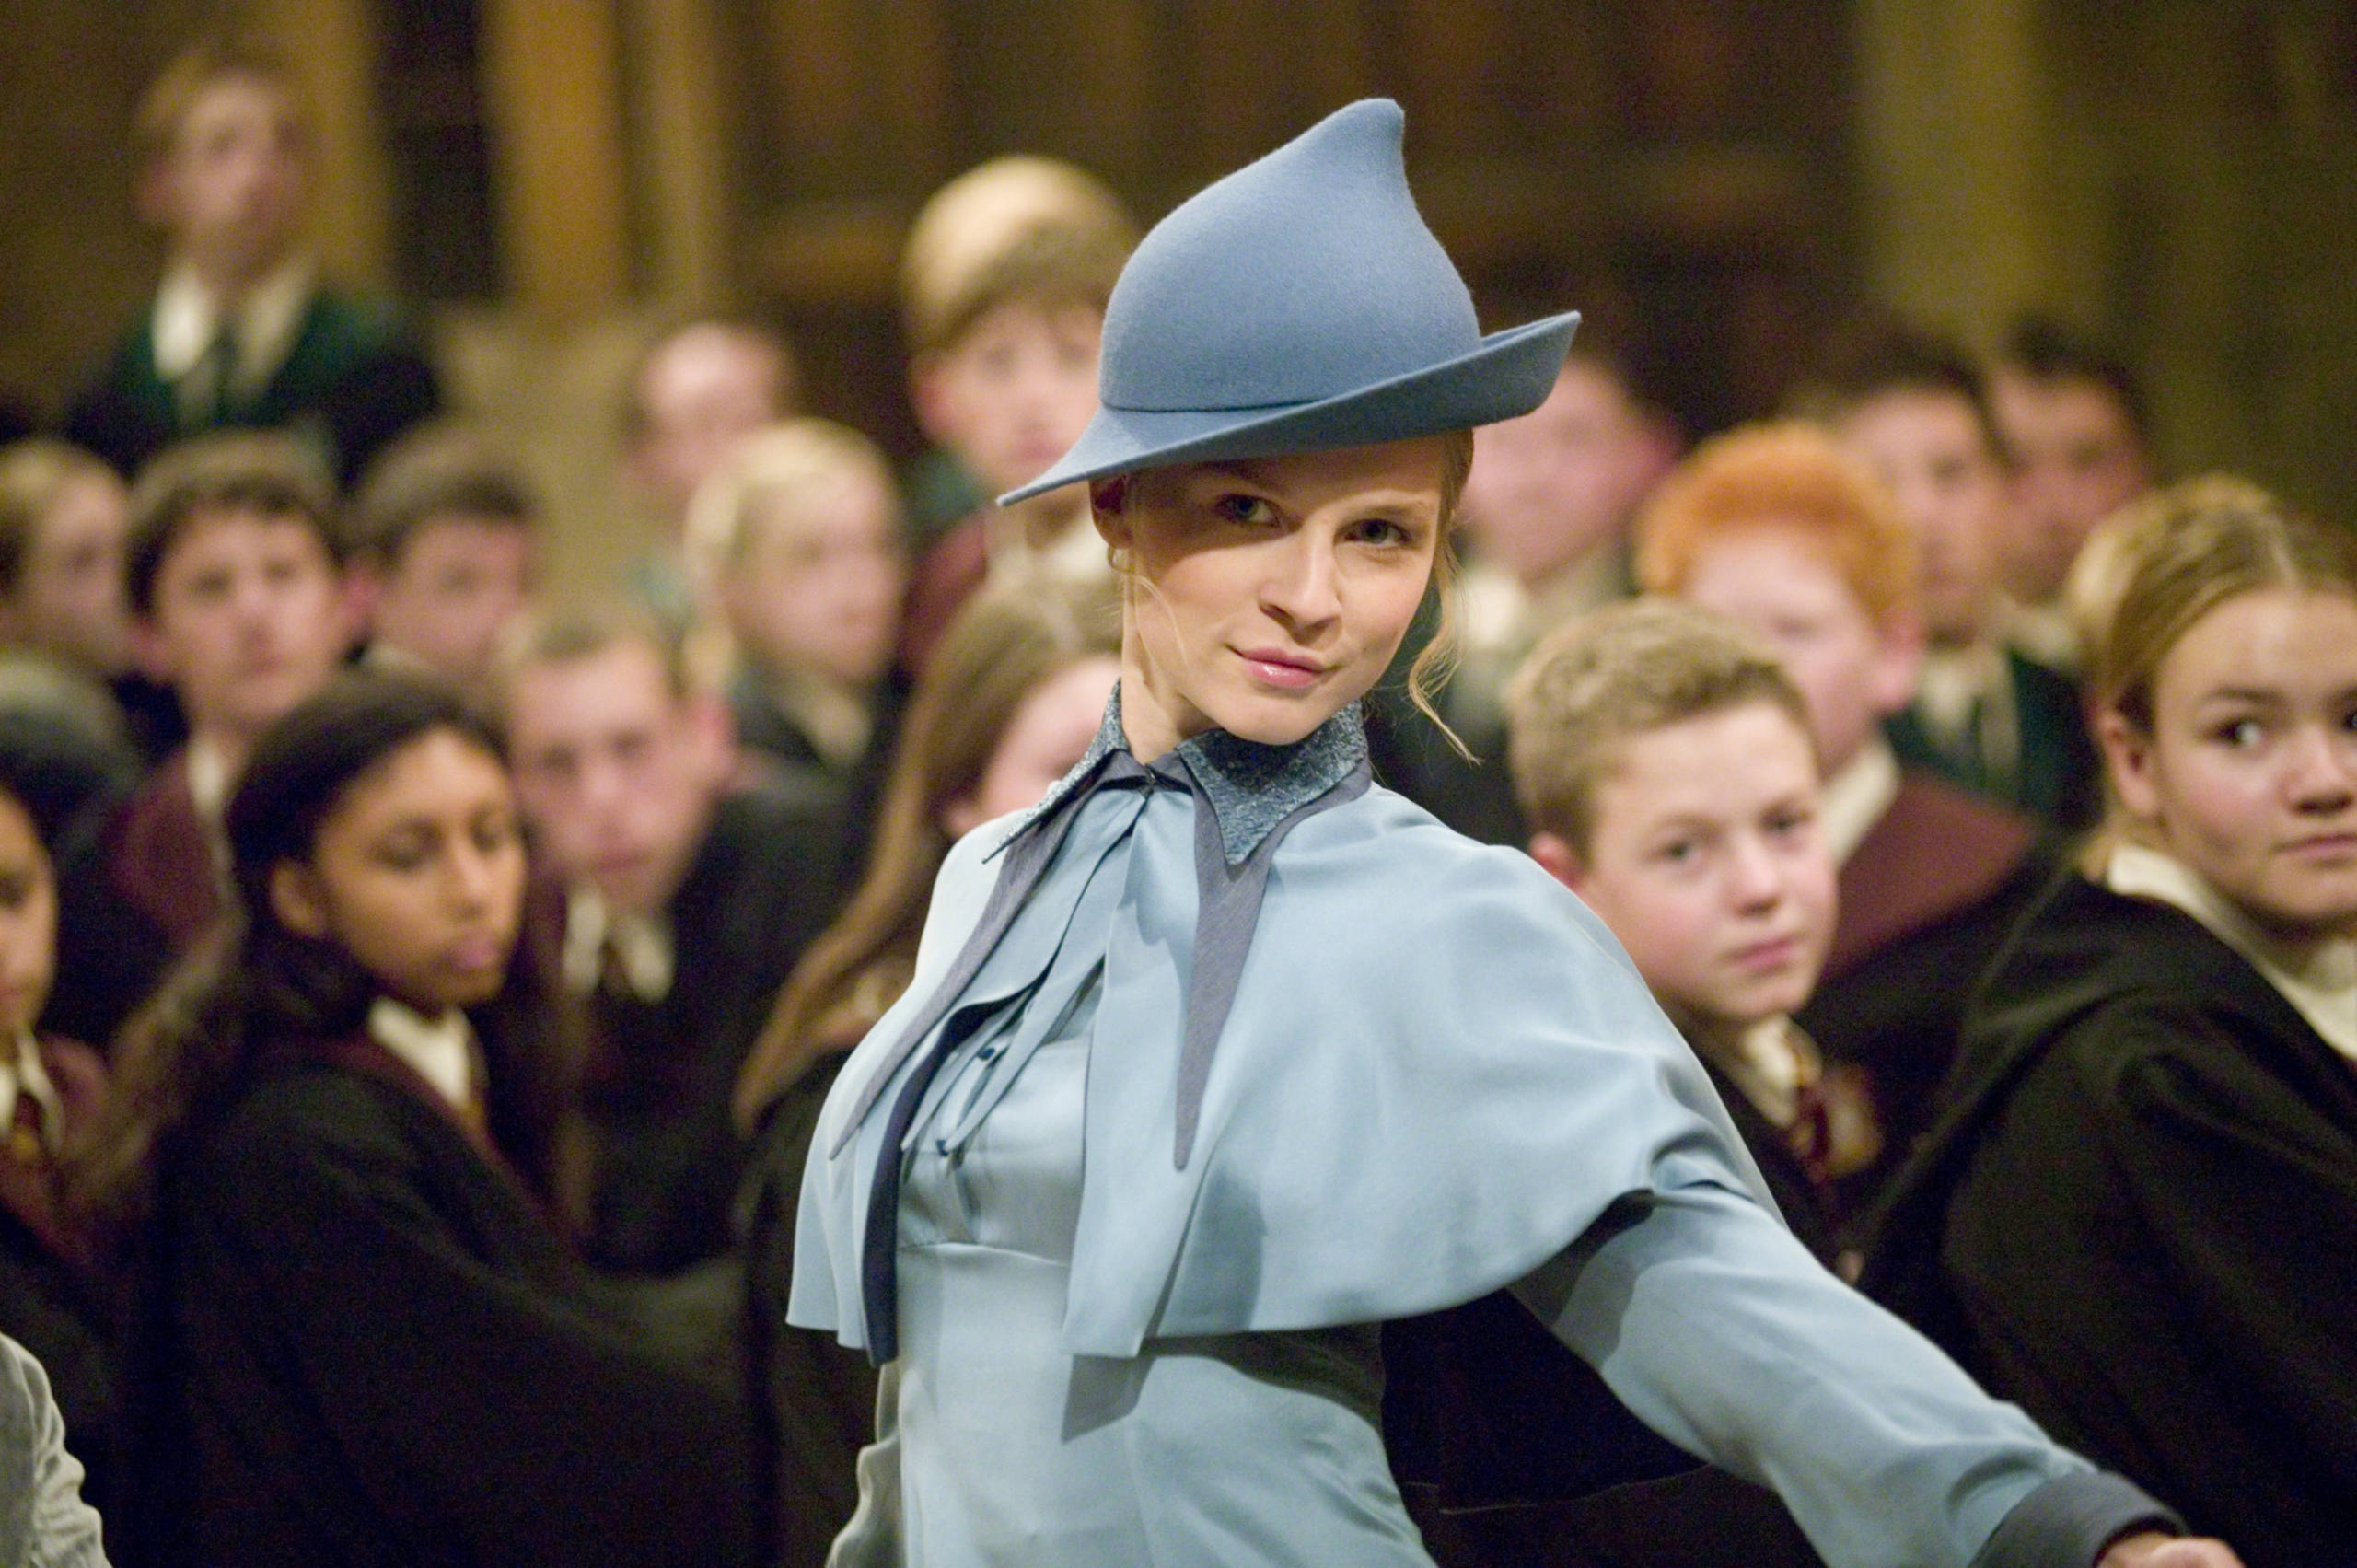 Who played the character of Fleur Delacour's grandfather in the Harry Potter films?